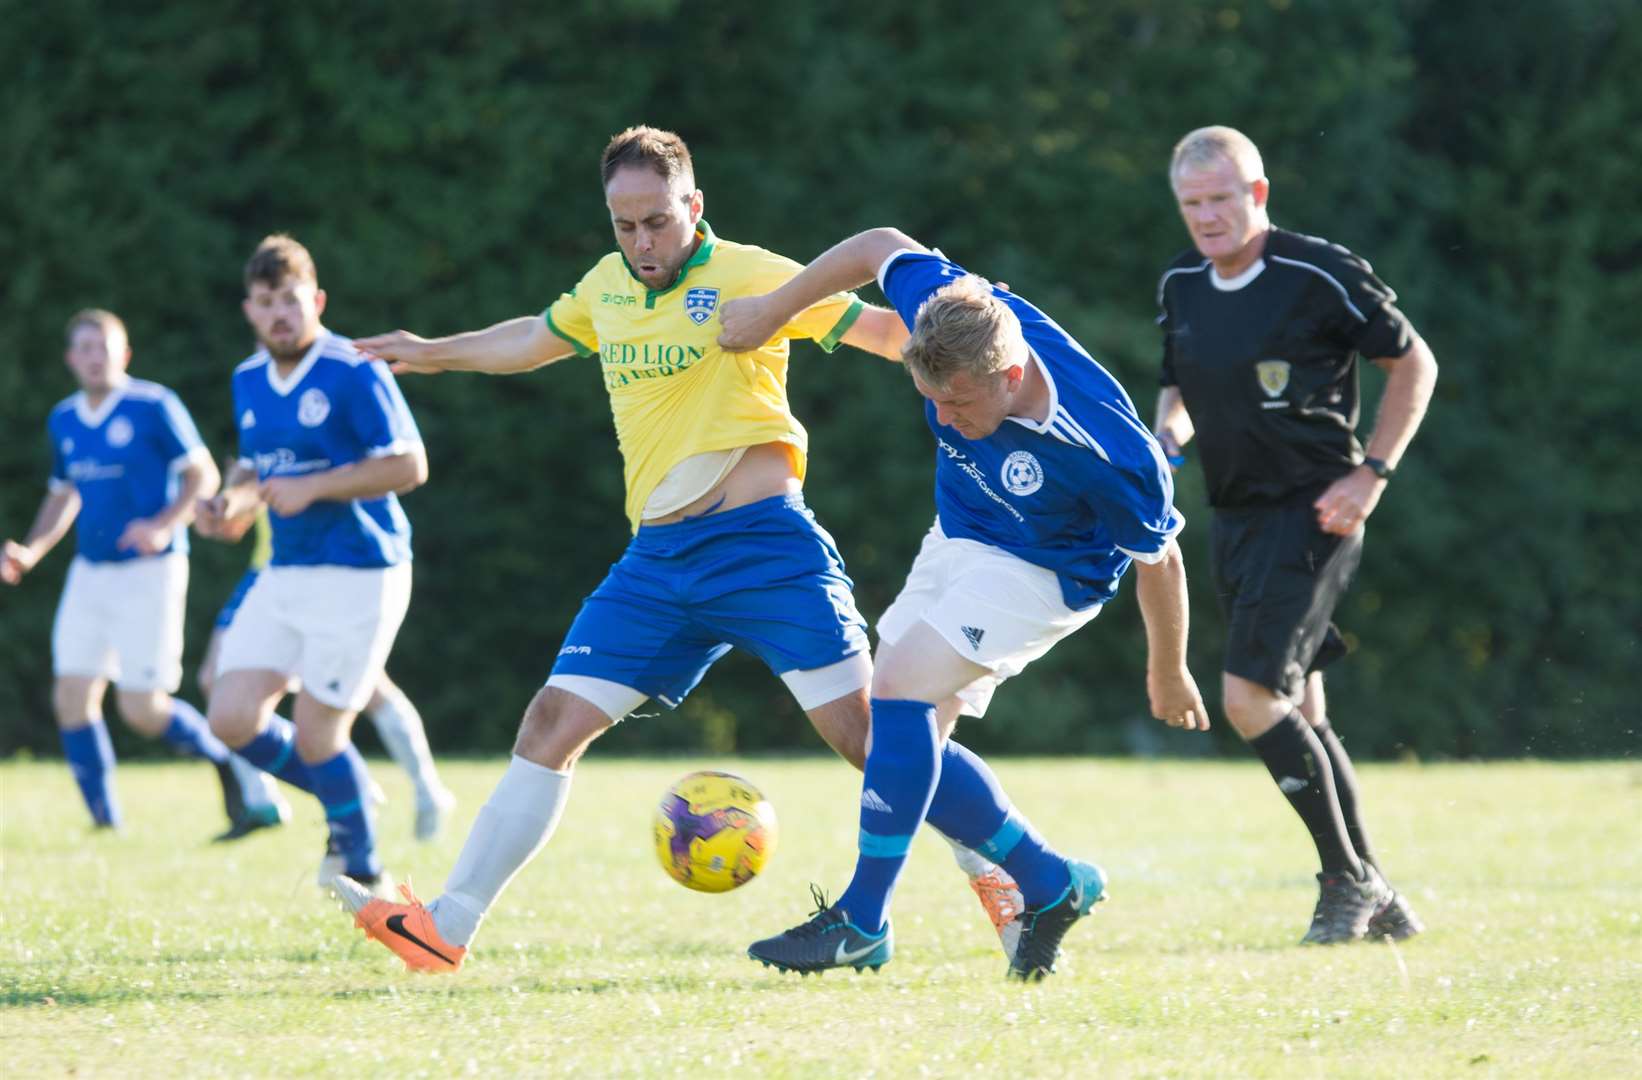 Gary Burchell (left) was on target for FC Fochabers in their win at Aberlour Villa.